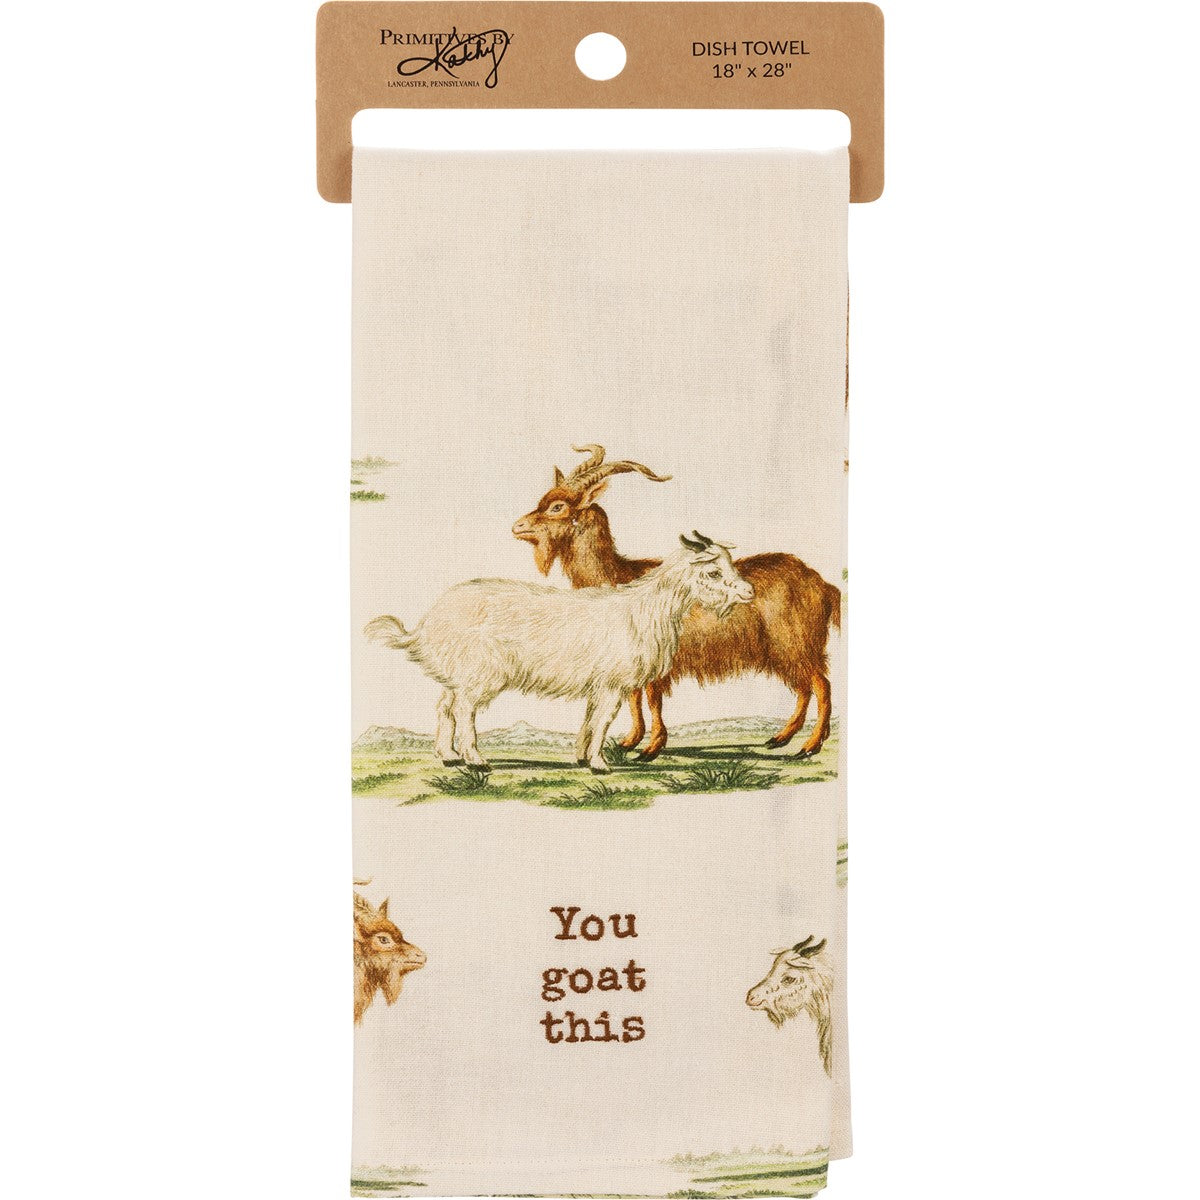 View Primitives by Kathy - You Goat This Kitchen Towel